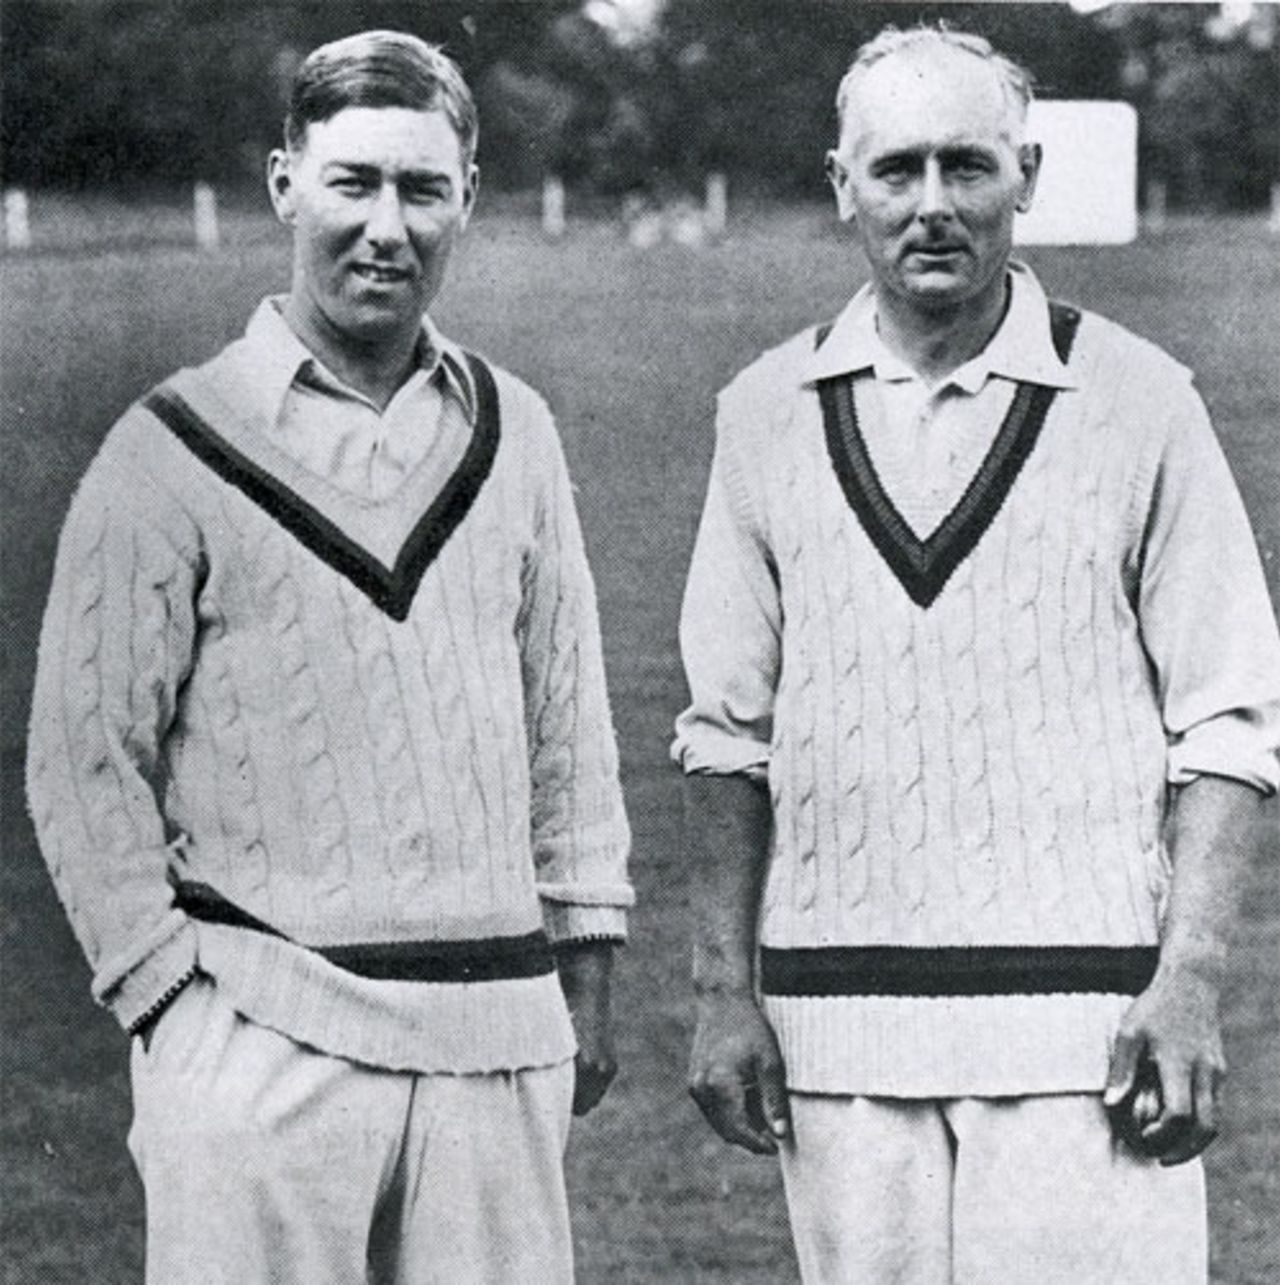 Norman Yardley and Hedley Verity in a charity game Ireland in September 1941. It was Verity's last match and he took 8 for 55